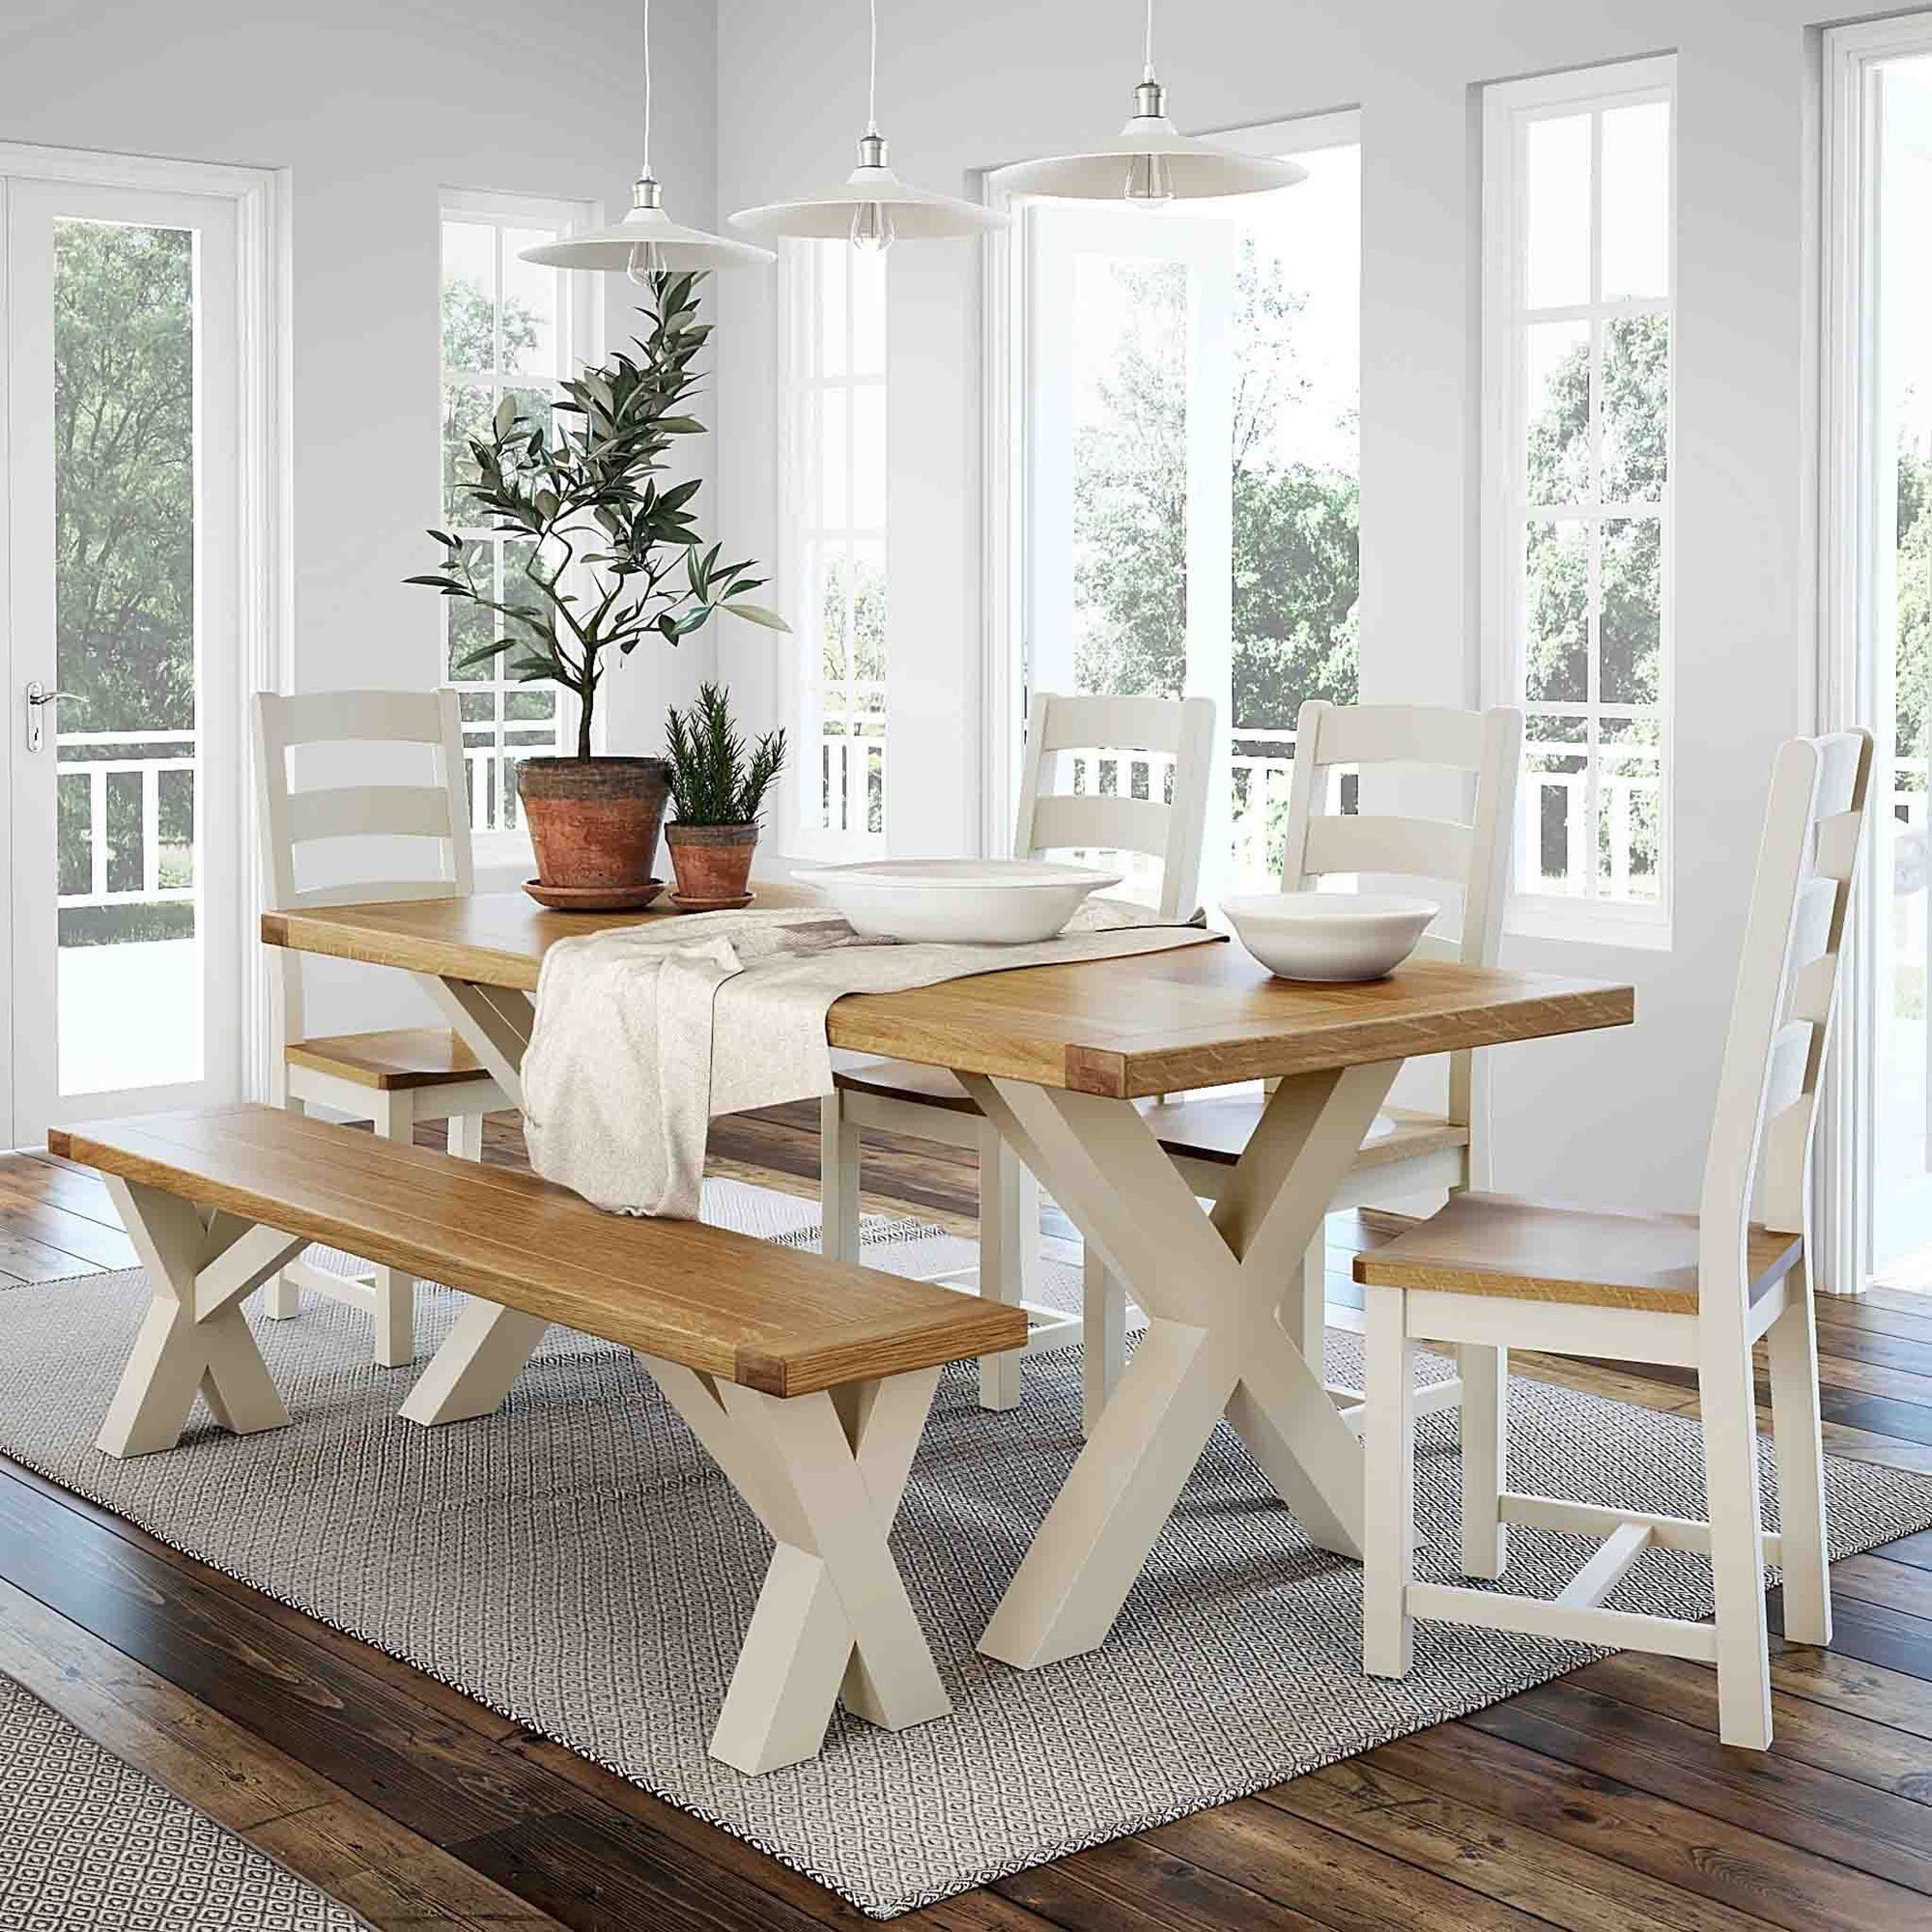 Daymer Cream Painted Cross Leg Dining Table With Oak Top Roseland Furniture